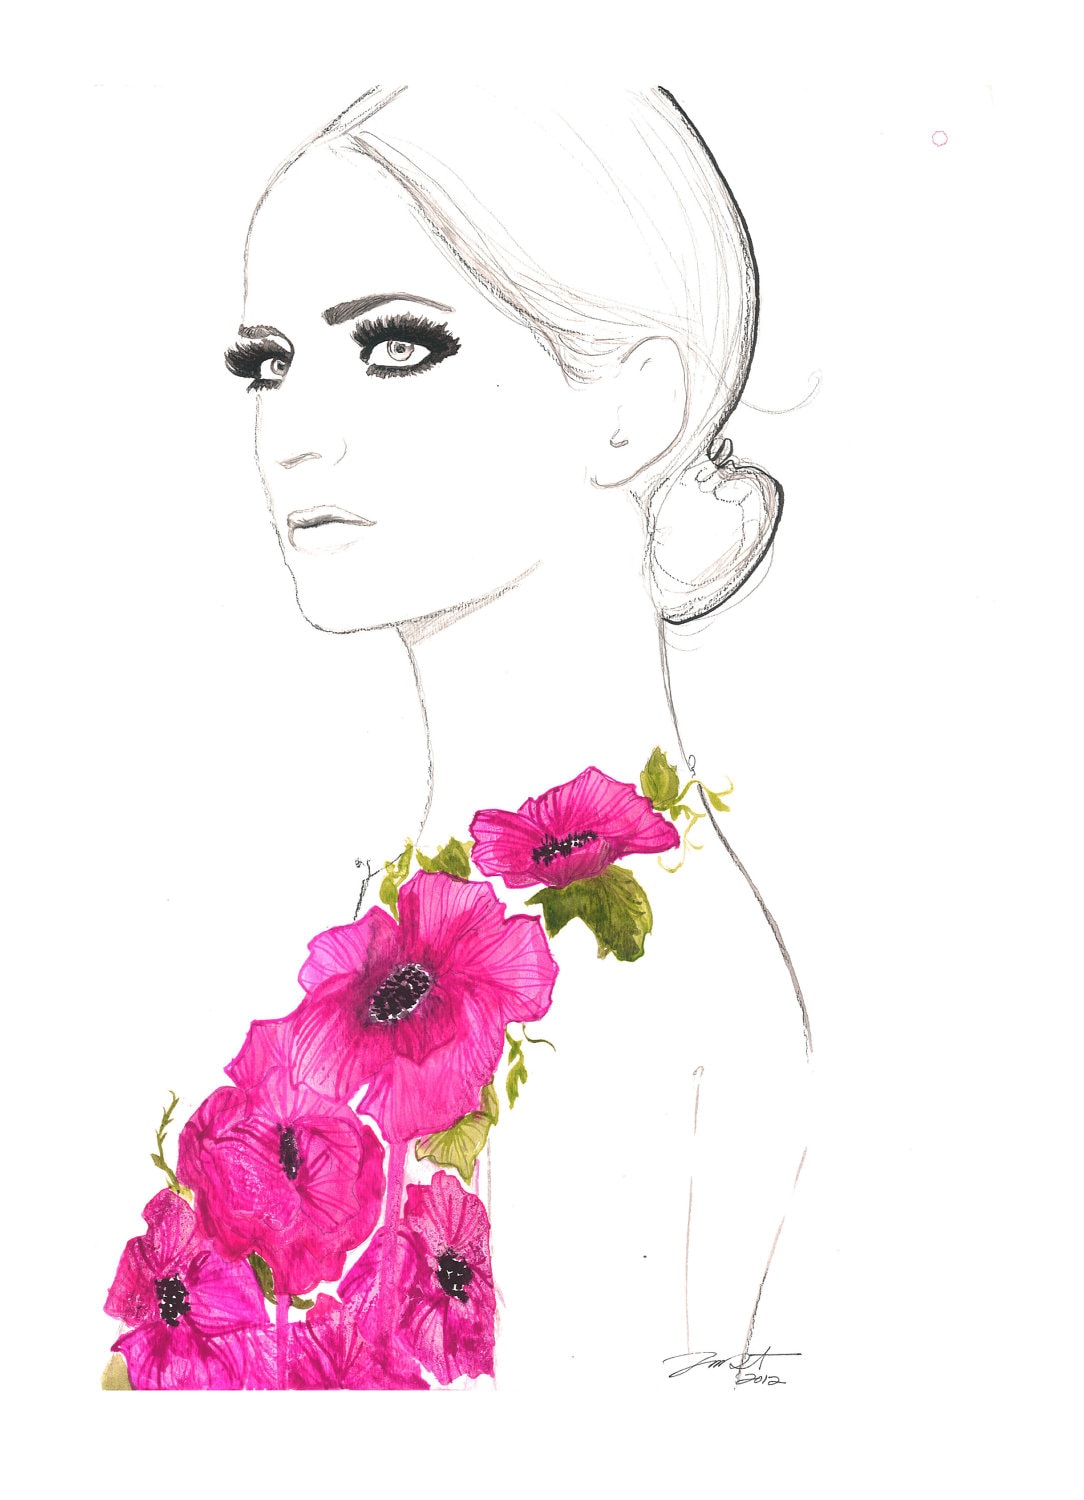 Print From Original Watercolor And Pen Fashion Illustration By